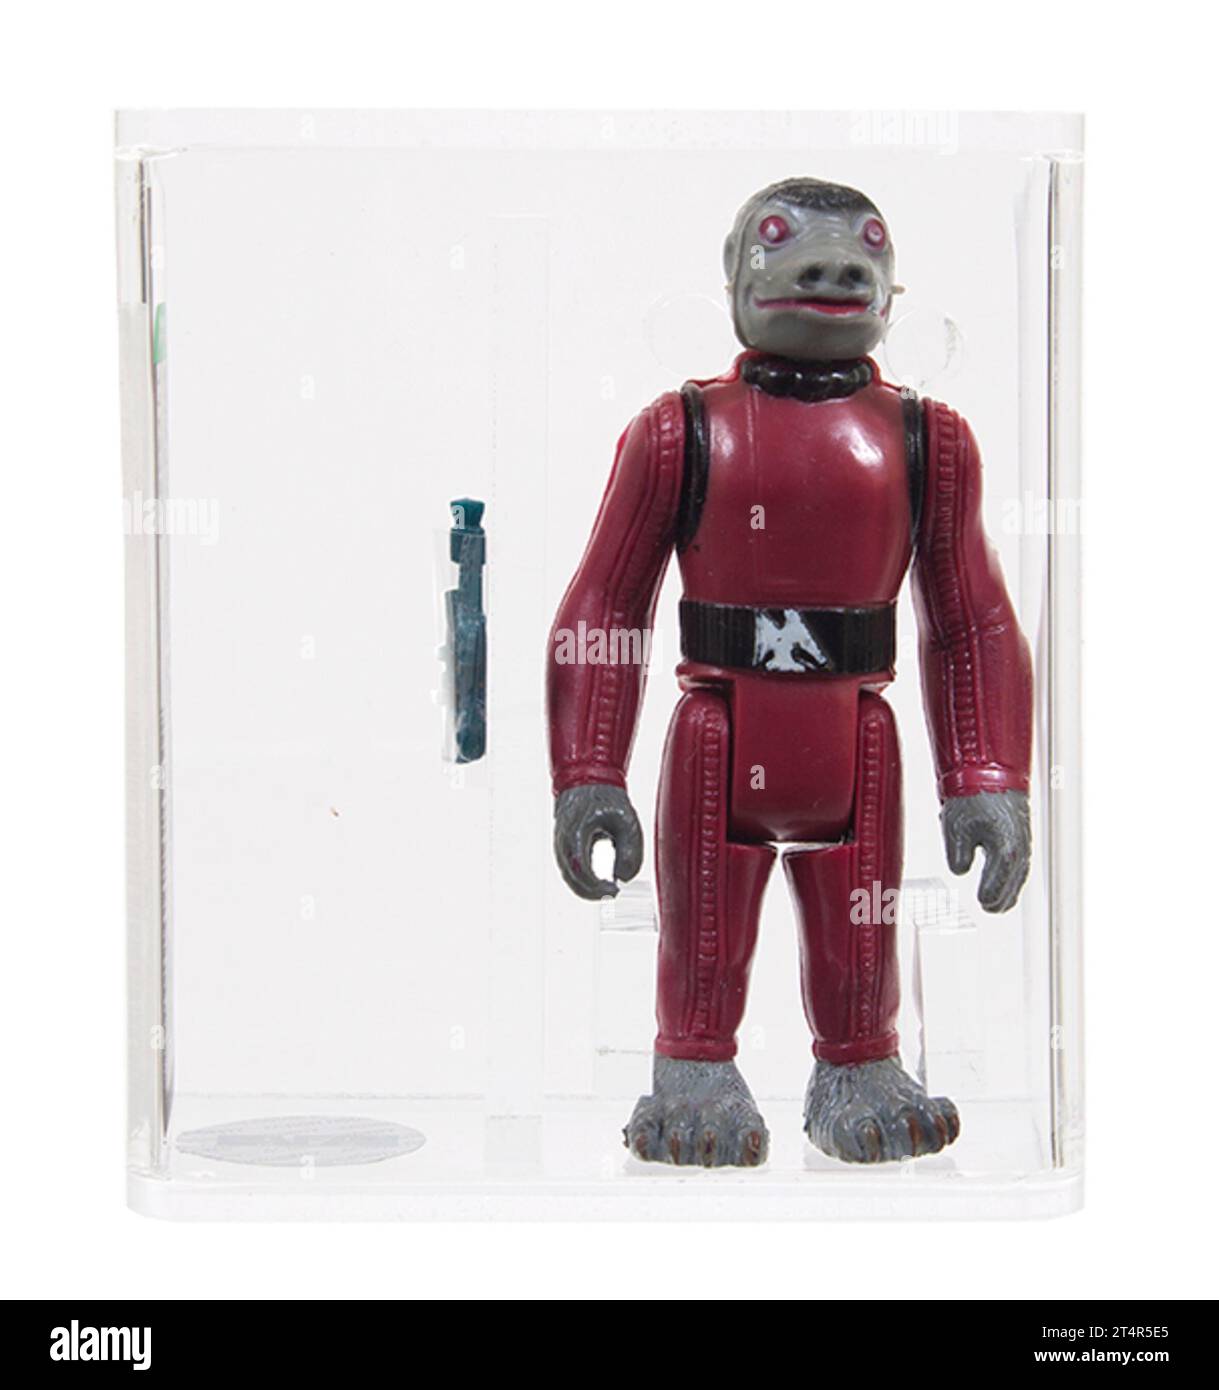 Kenner Star Wars Snaggletooth Action Figure AFA Stock Photo